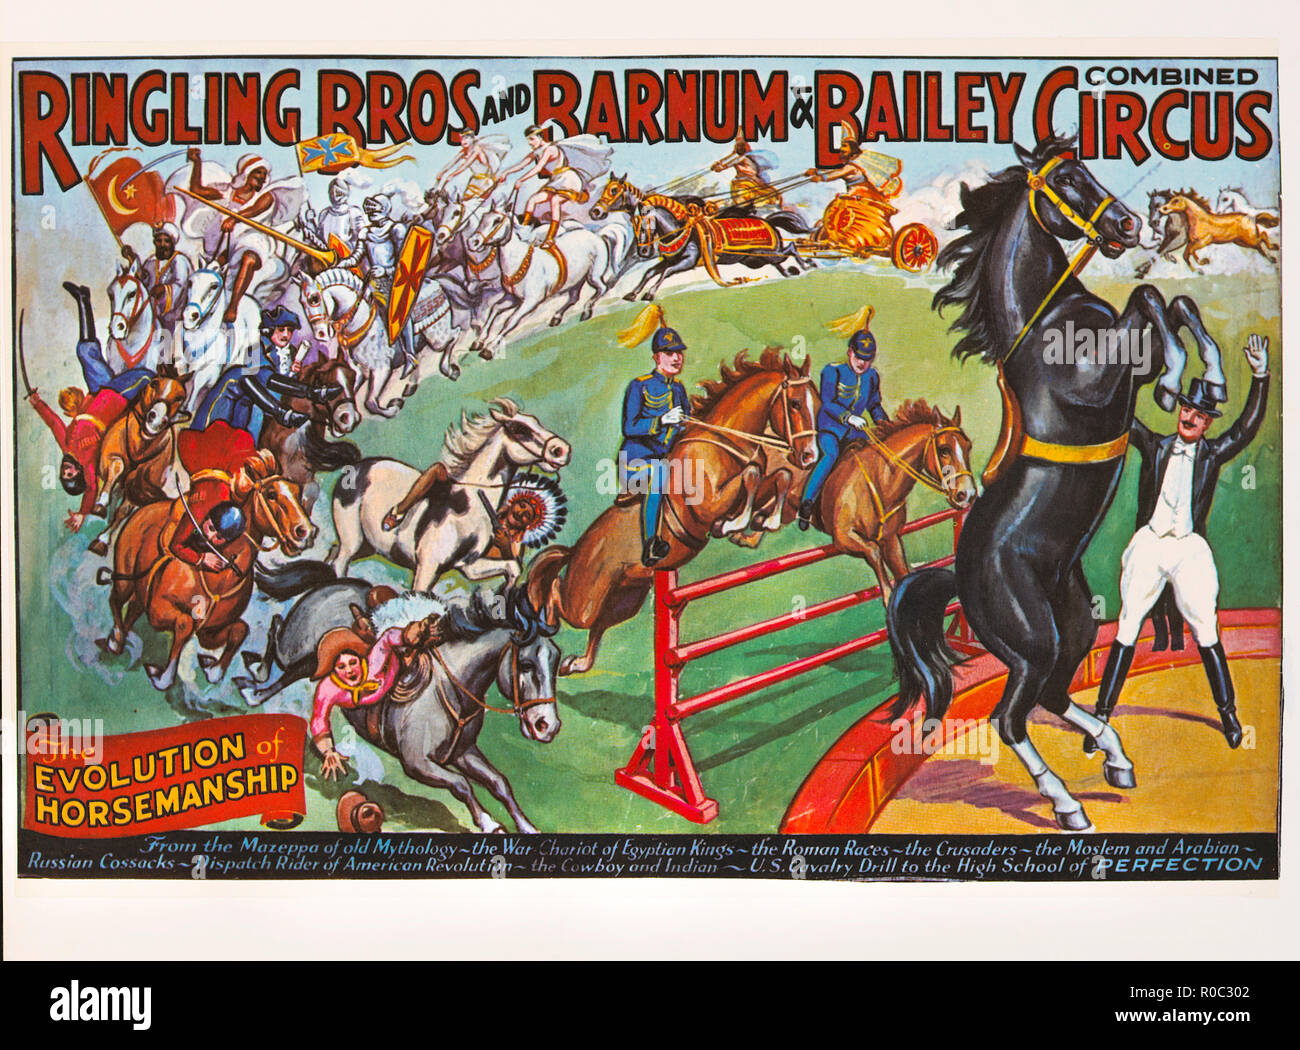 Ringling Bros and Barnum & Bailey Combined Circus, The Evolution of Horsemanship, Circus Poster, Lithograph, 1930's Stock Photo